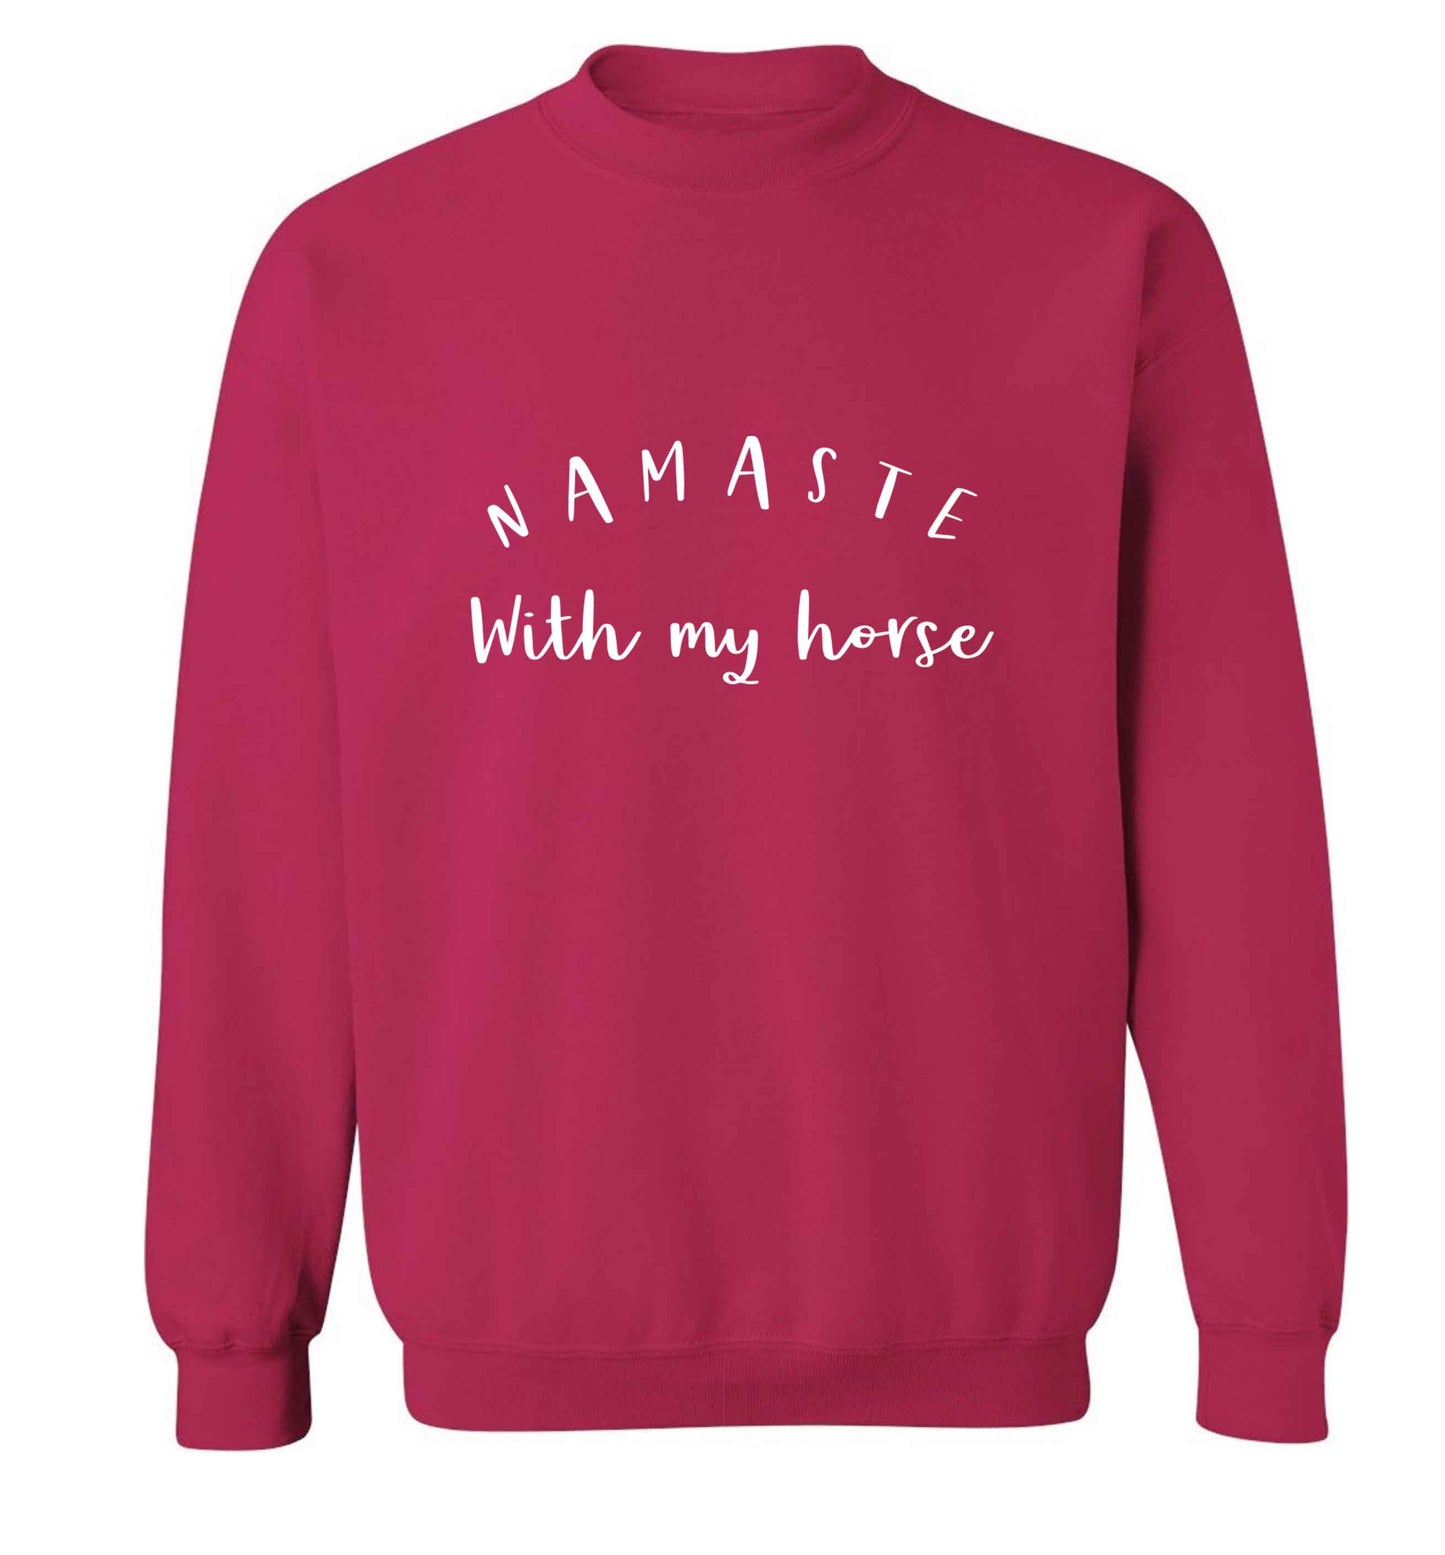 Namaste with my horse adult's unisex pink sweater 2XL